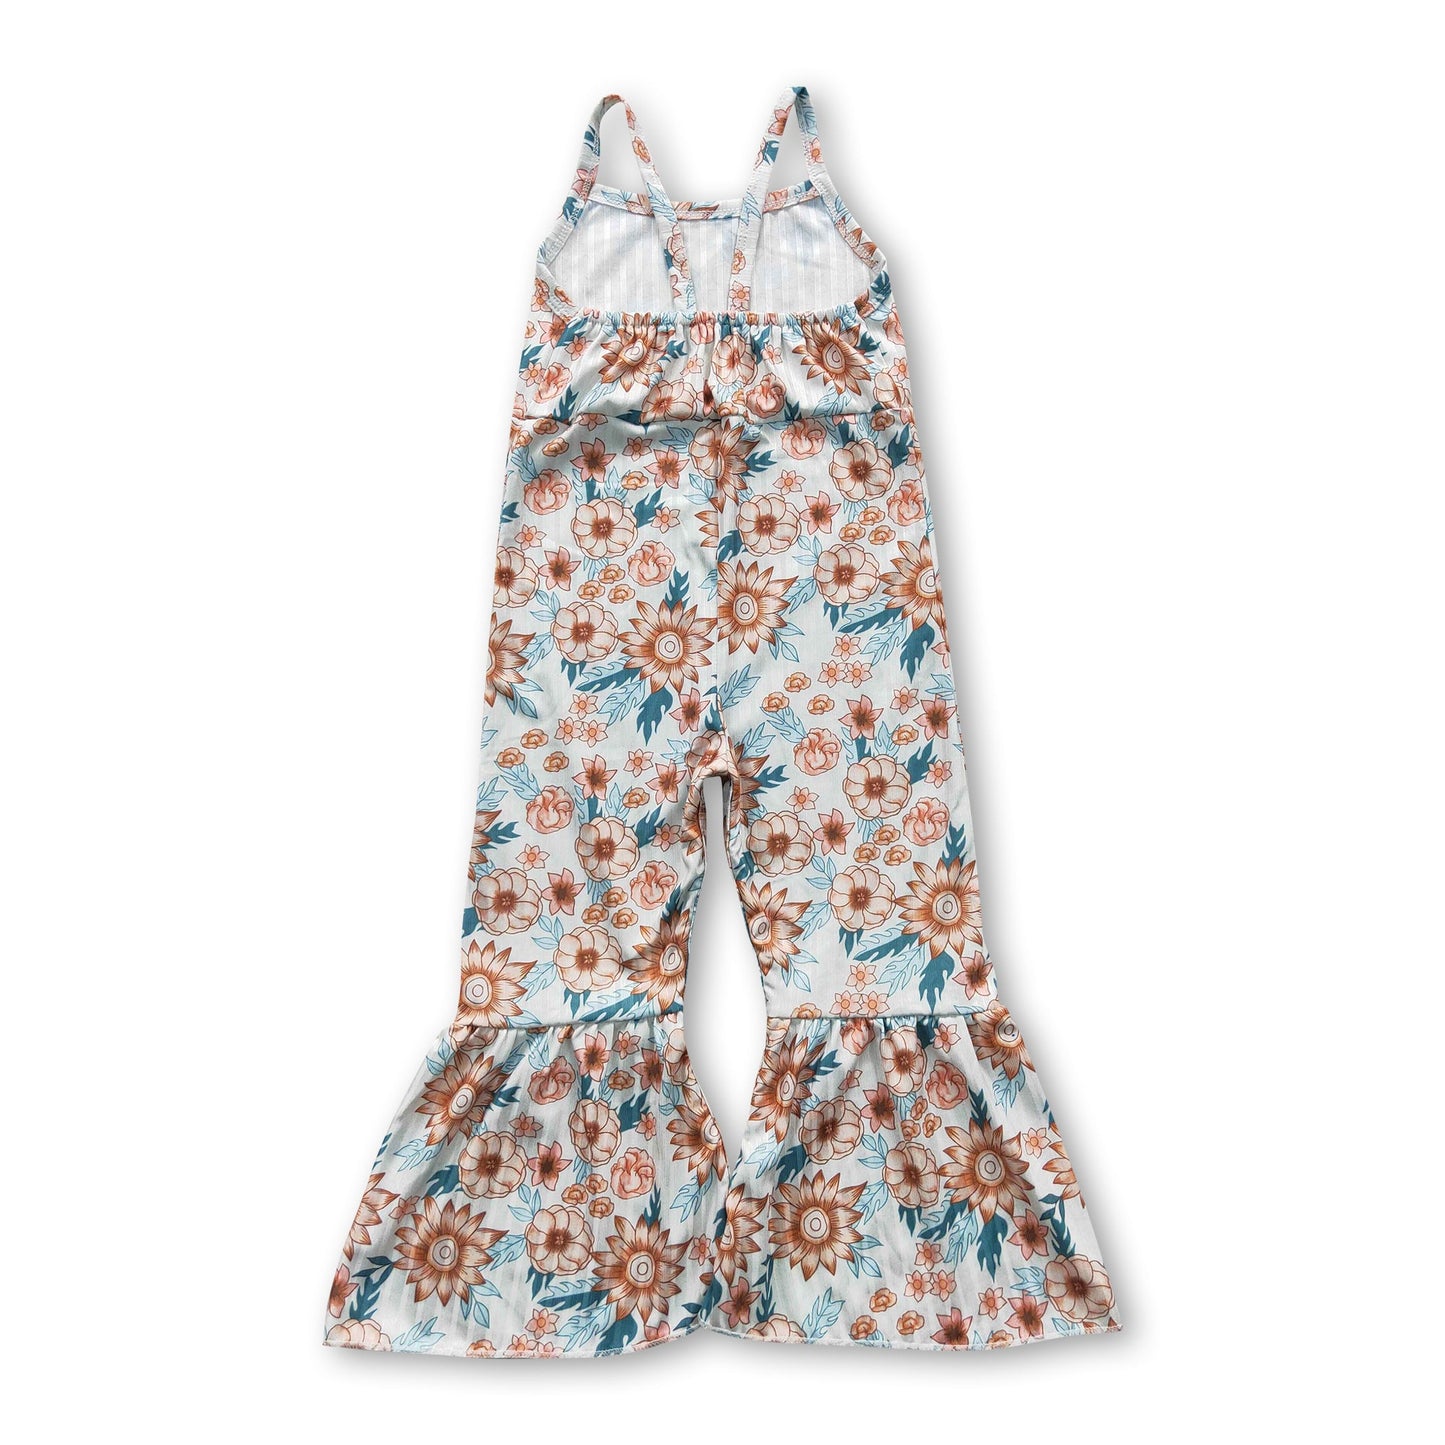 Floral sleeveless baby girls jumpsuit